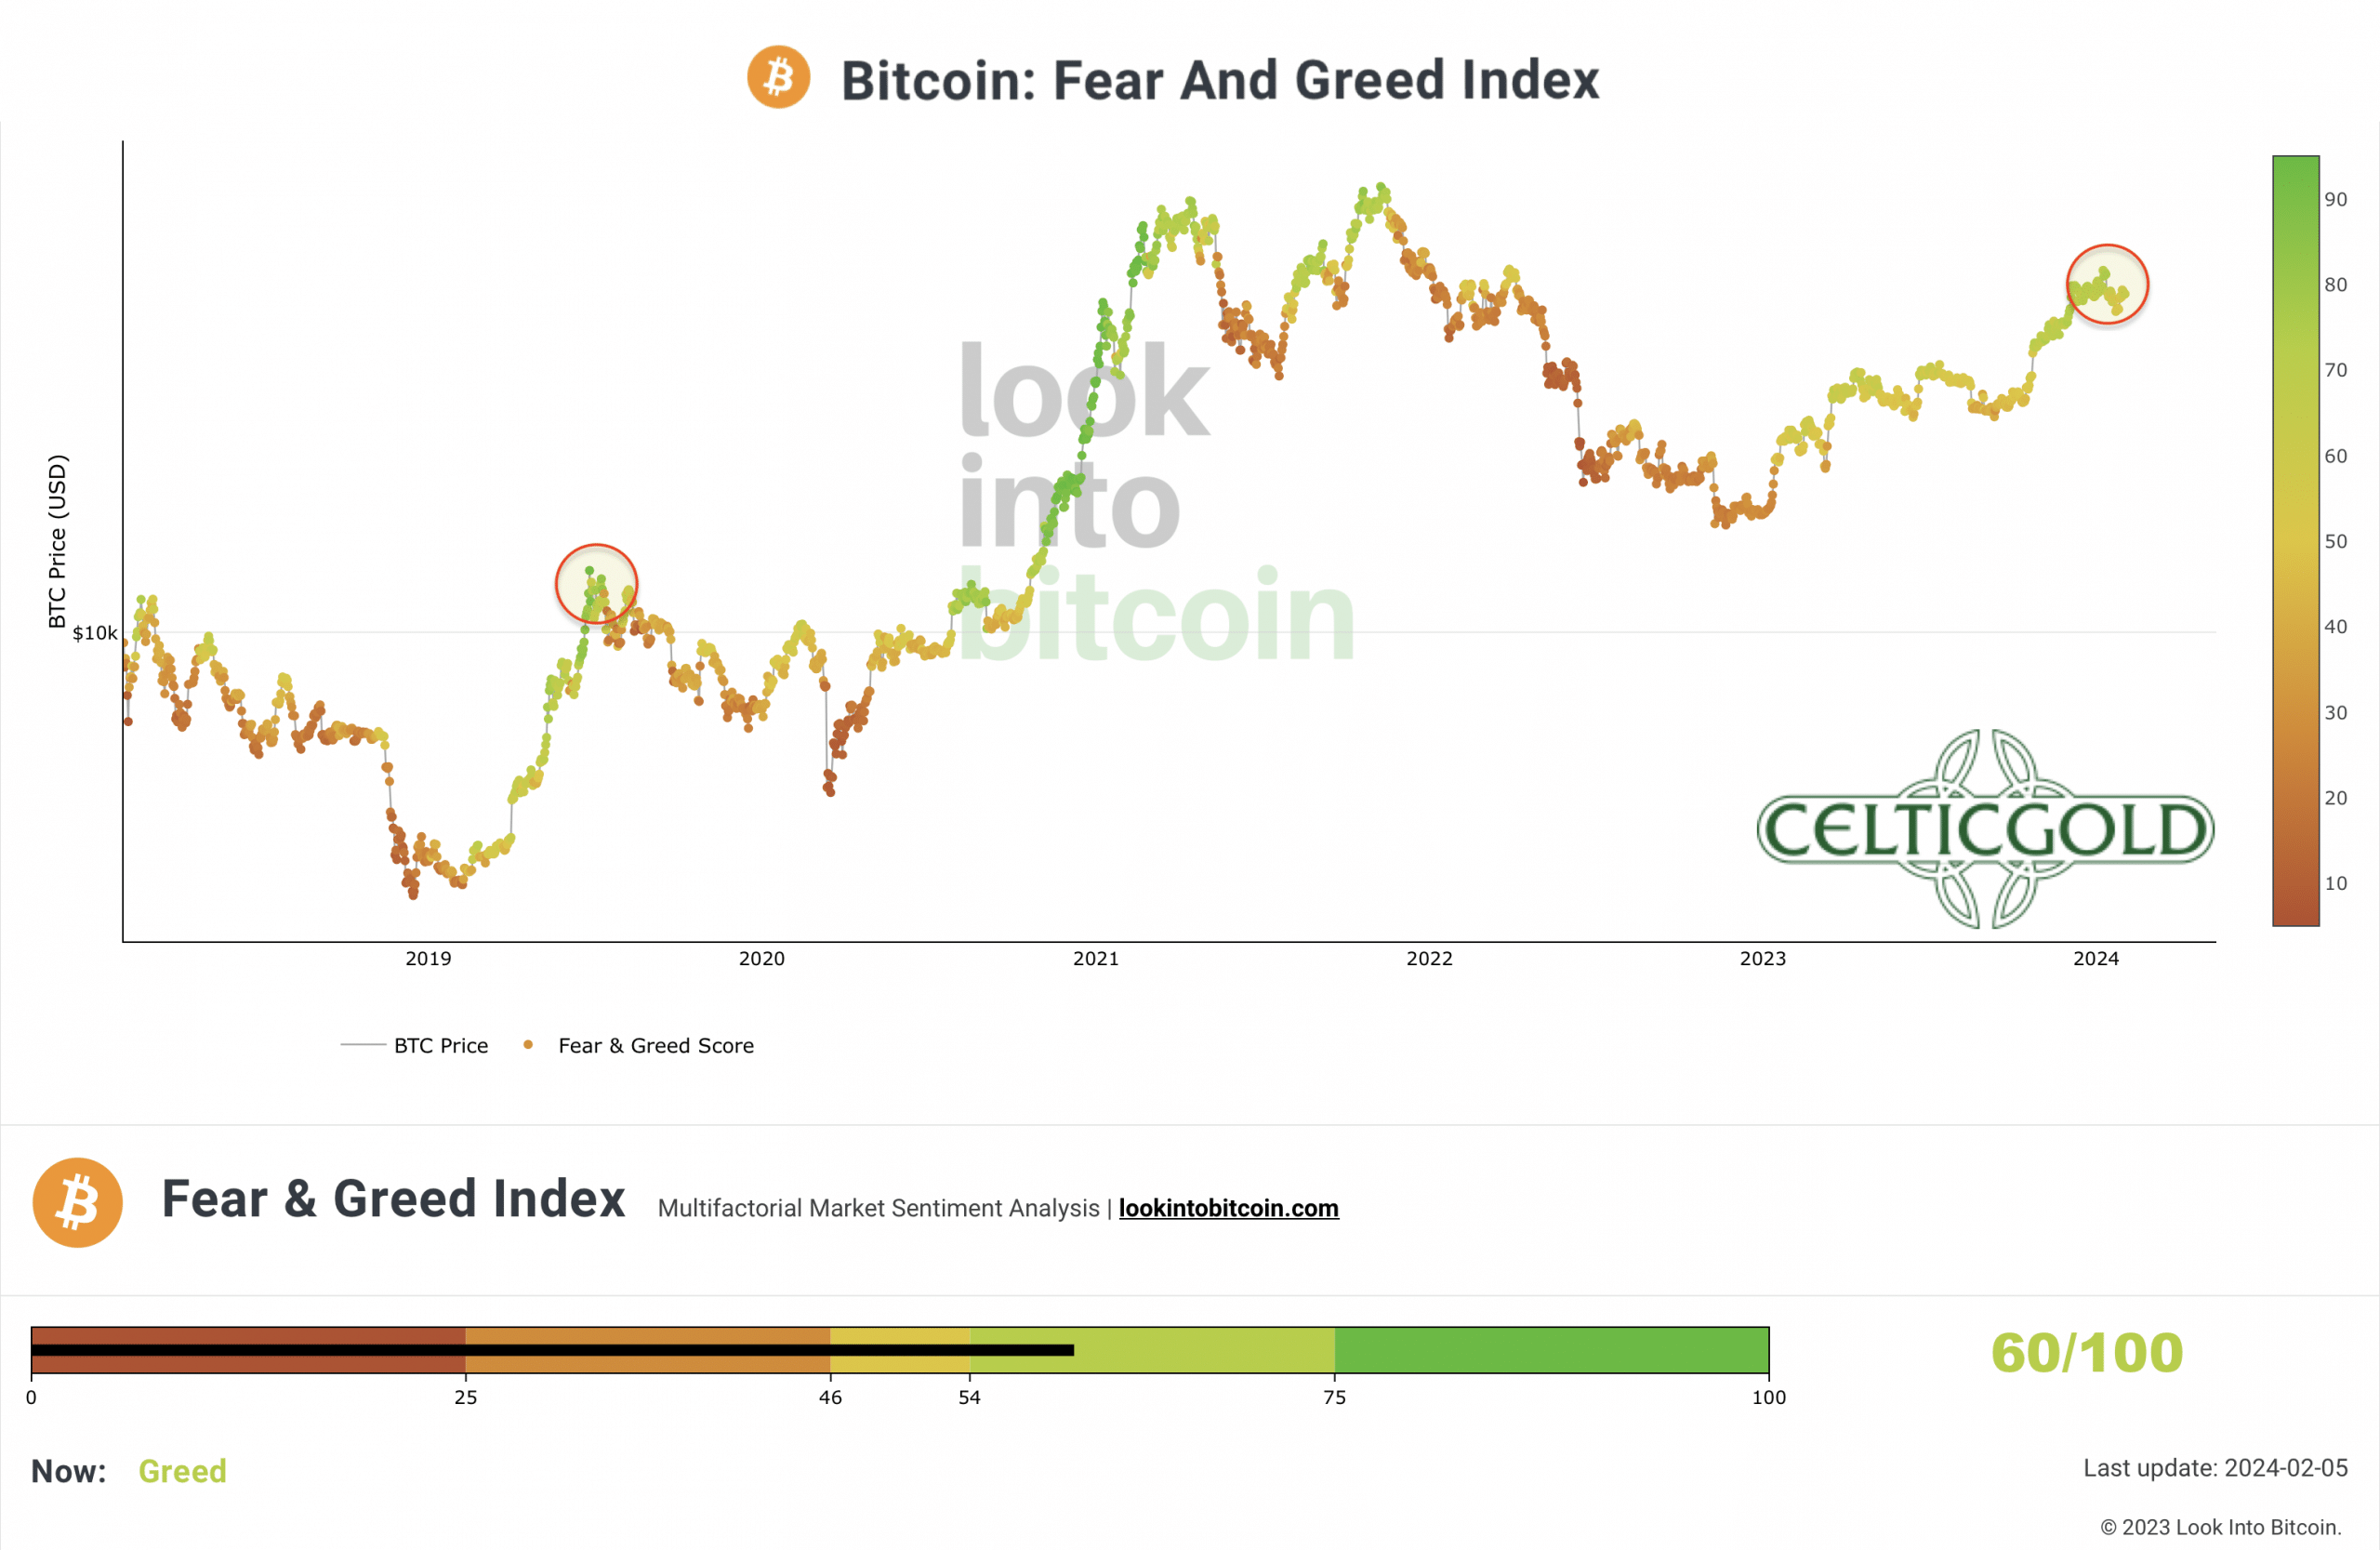 Crypto Fear & Greed Index long term, as of February 5th, 2024. Source: Lookintobitcoin